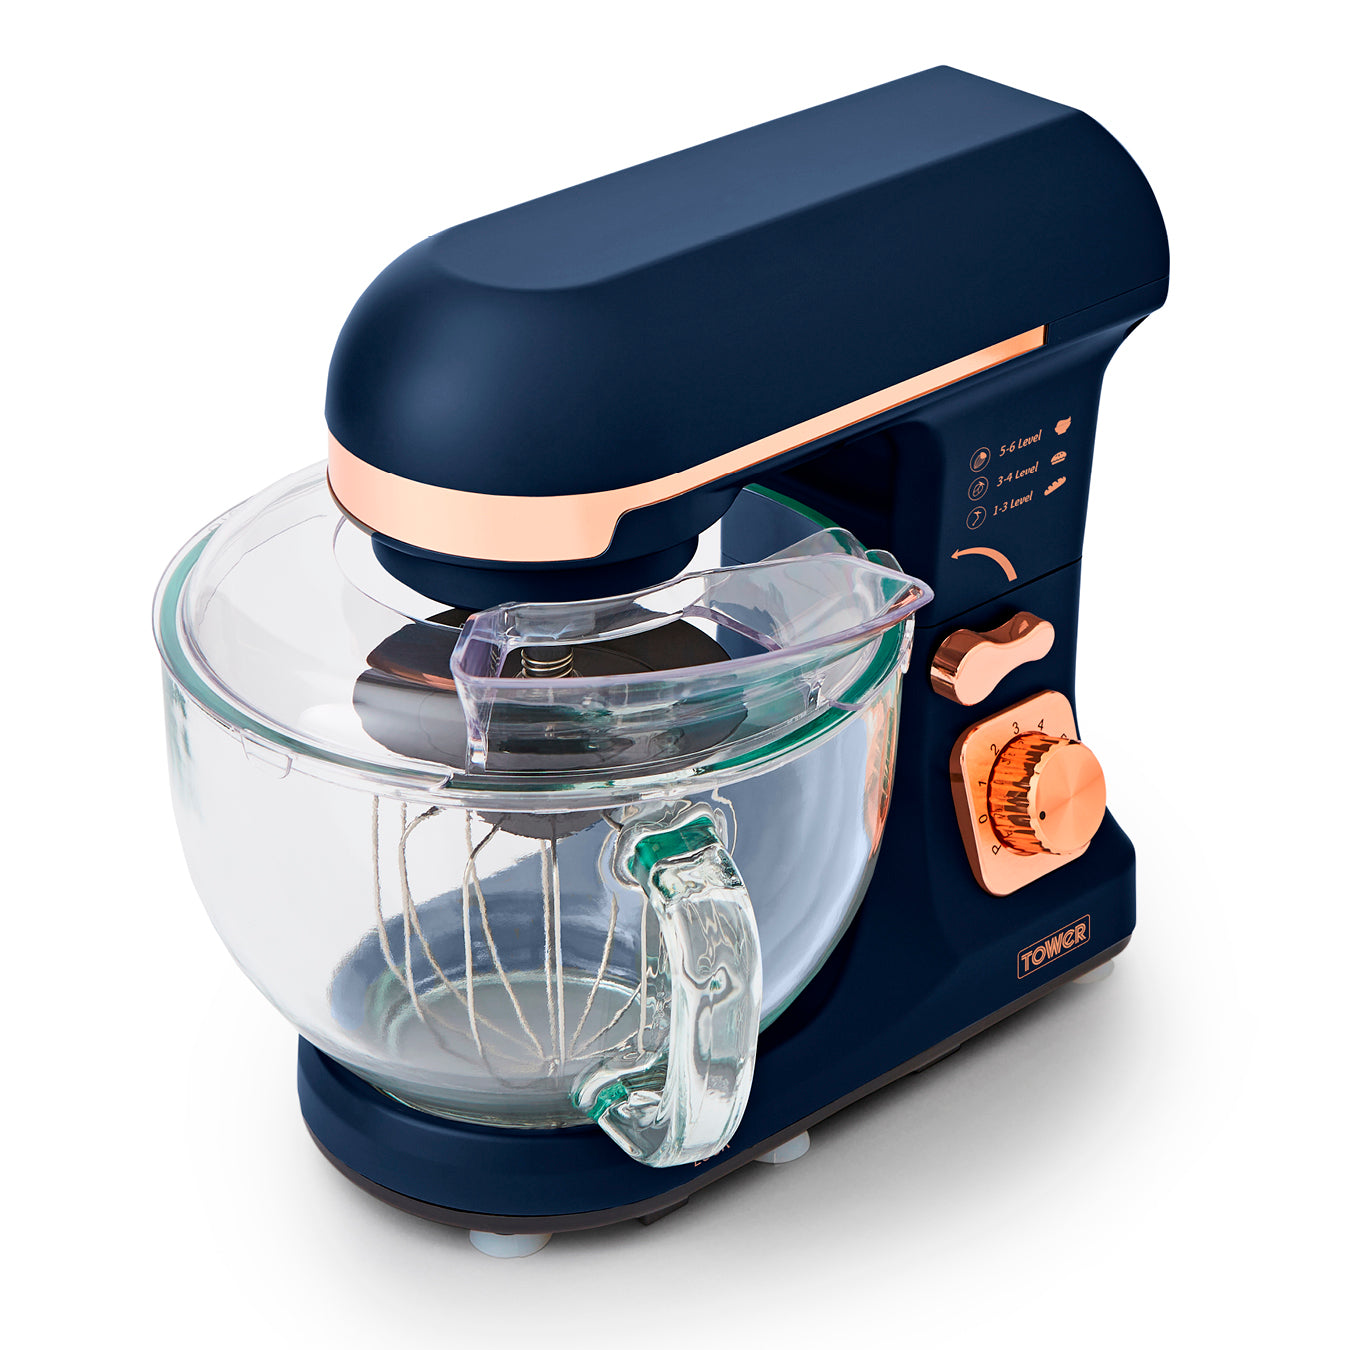 Tower Cavaletto 1000W Stand Mixer with 5L Glass Bowl - Midnight Blue